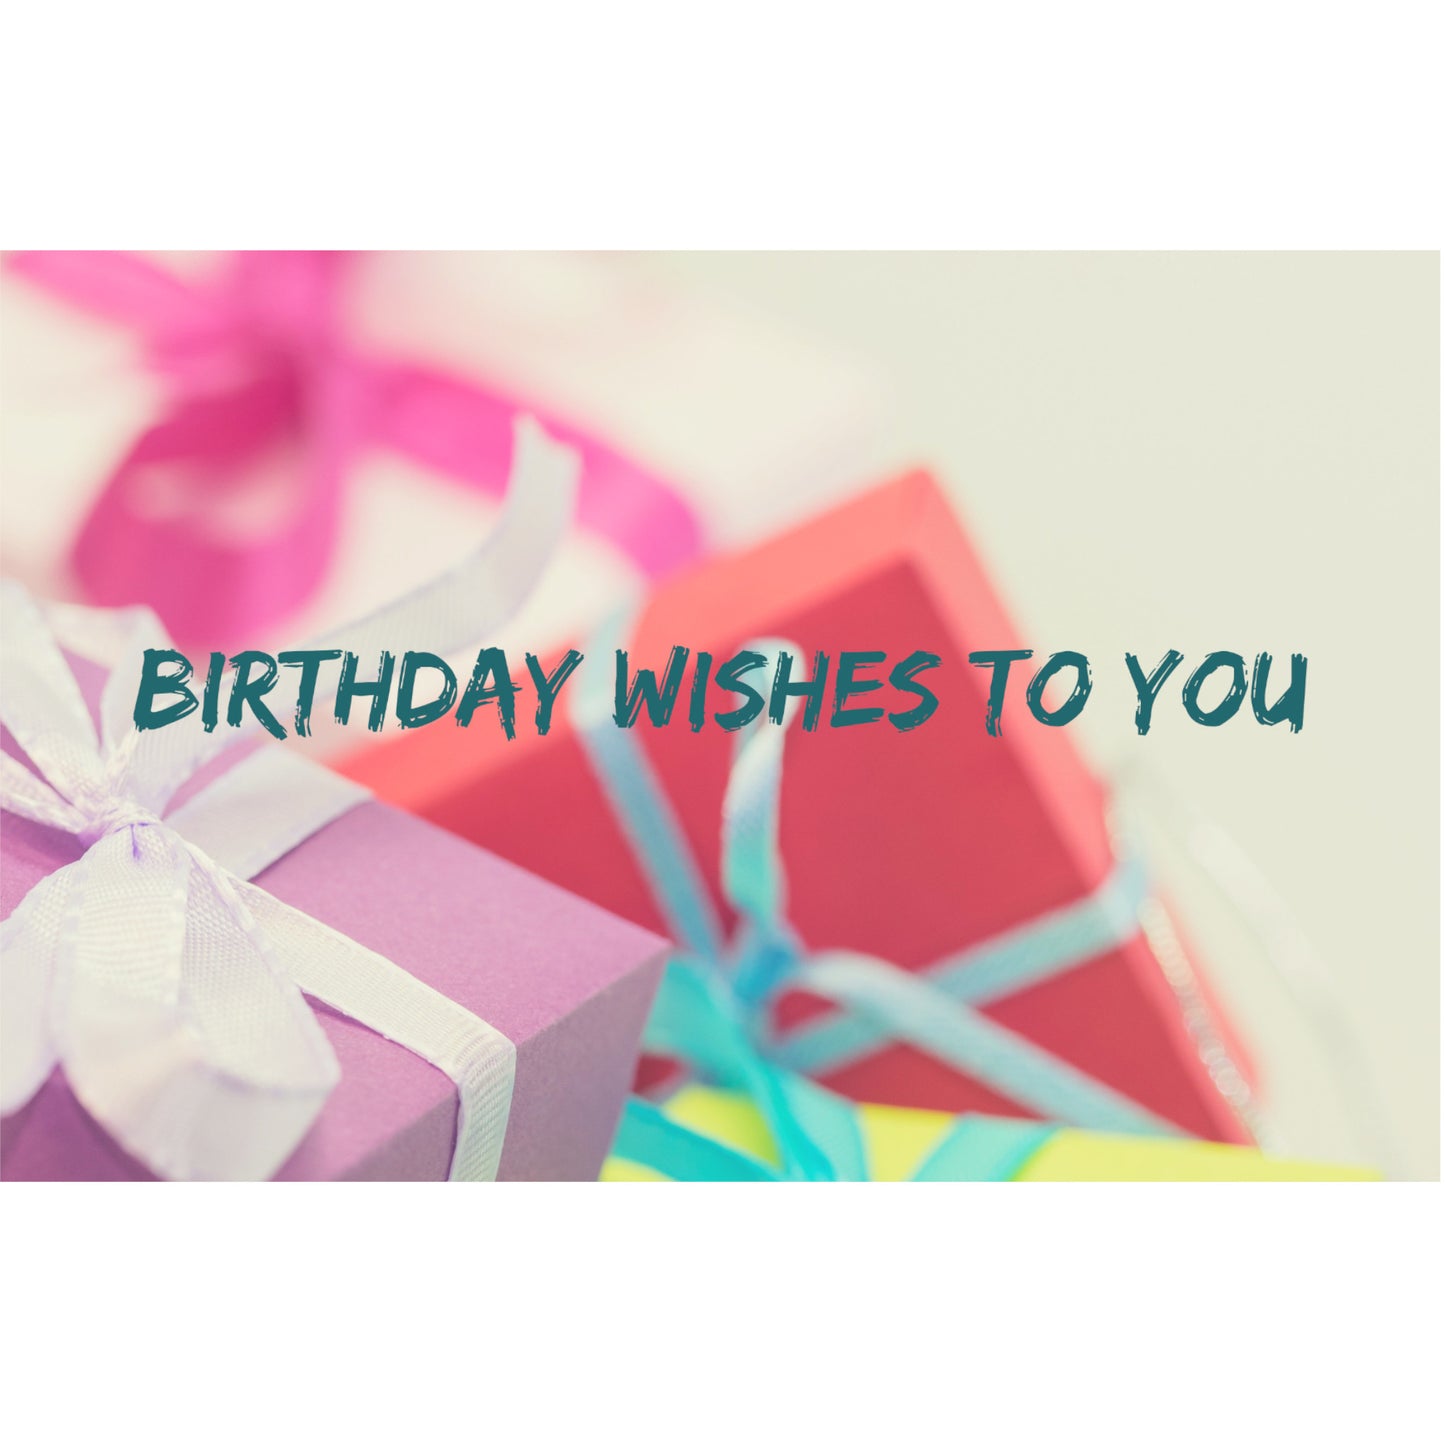 Birthday Wishes to You 8.5x5.5 Greeting Card, Digital Download